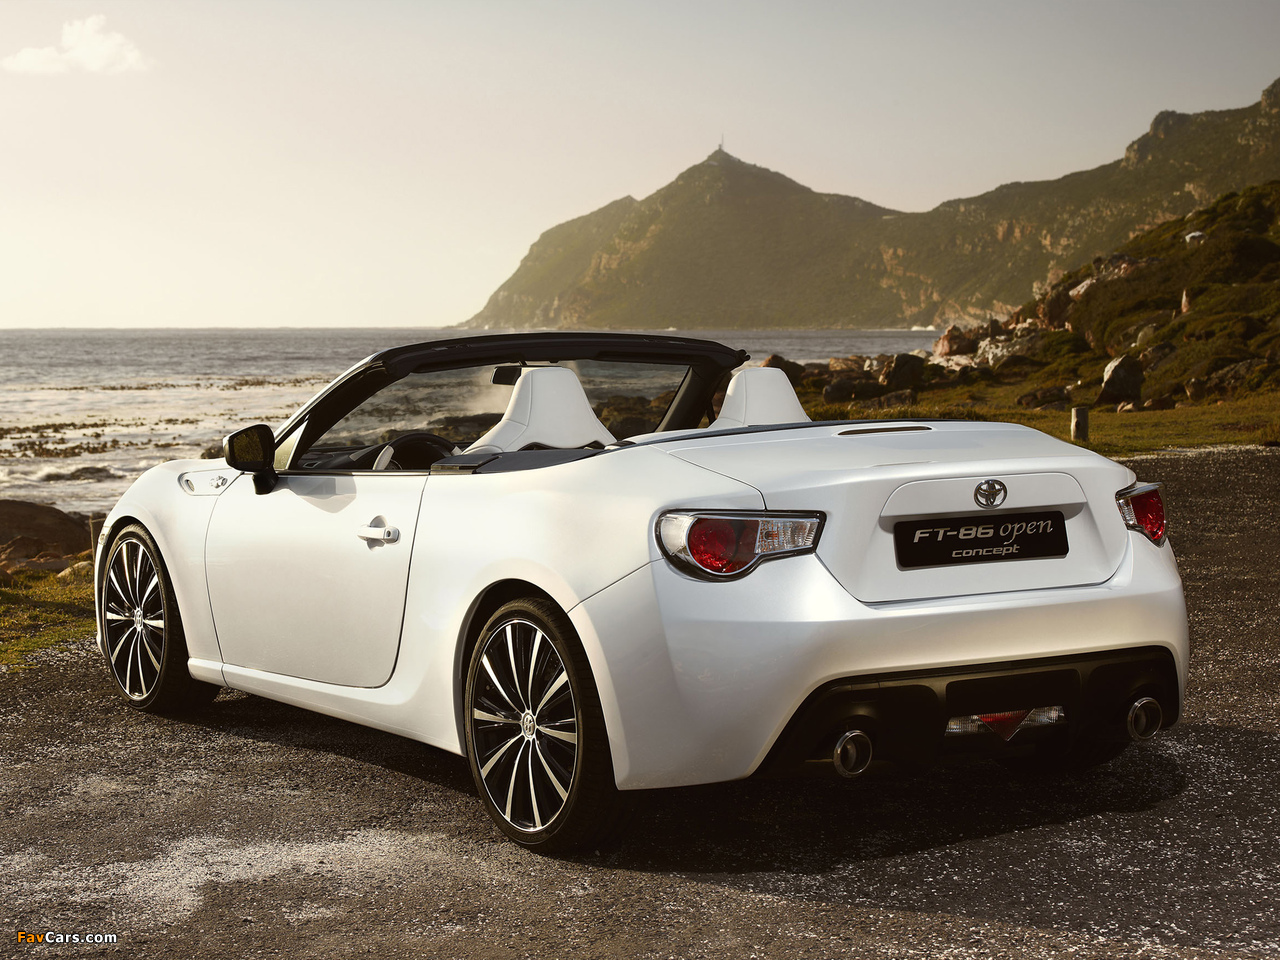 Toyota FT-86 Open Concept 2013 pictures (1280 x 960)